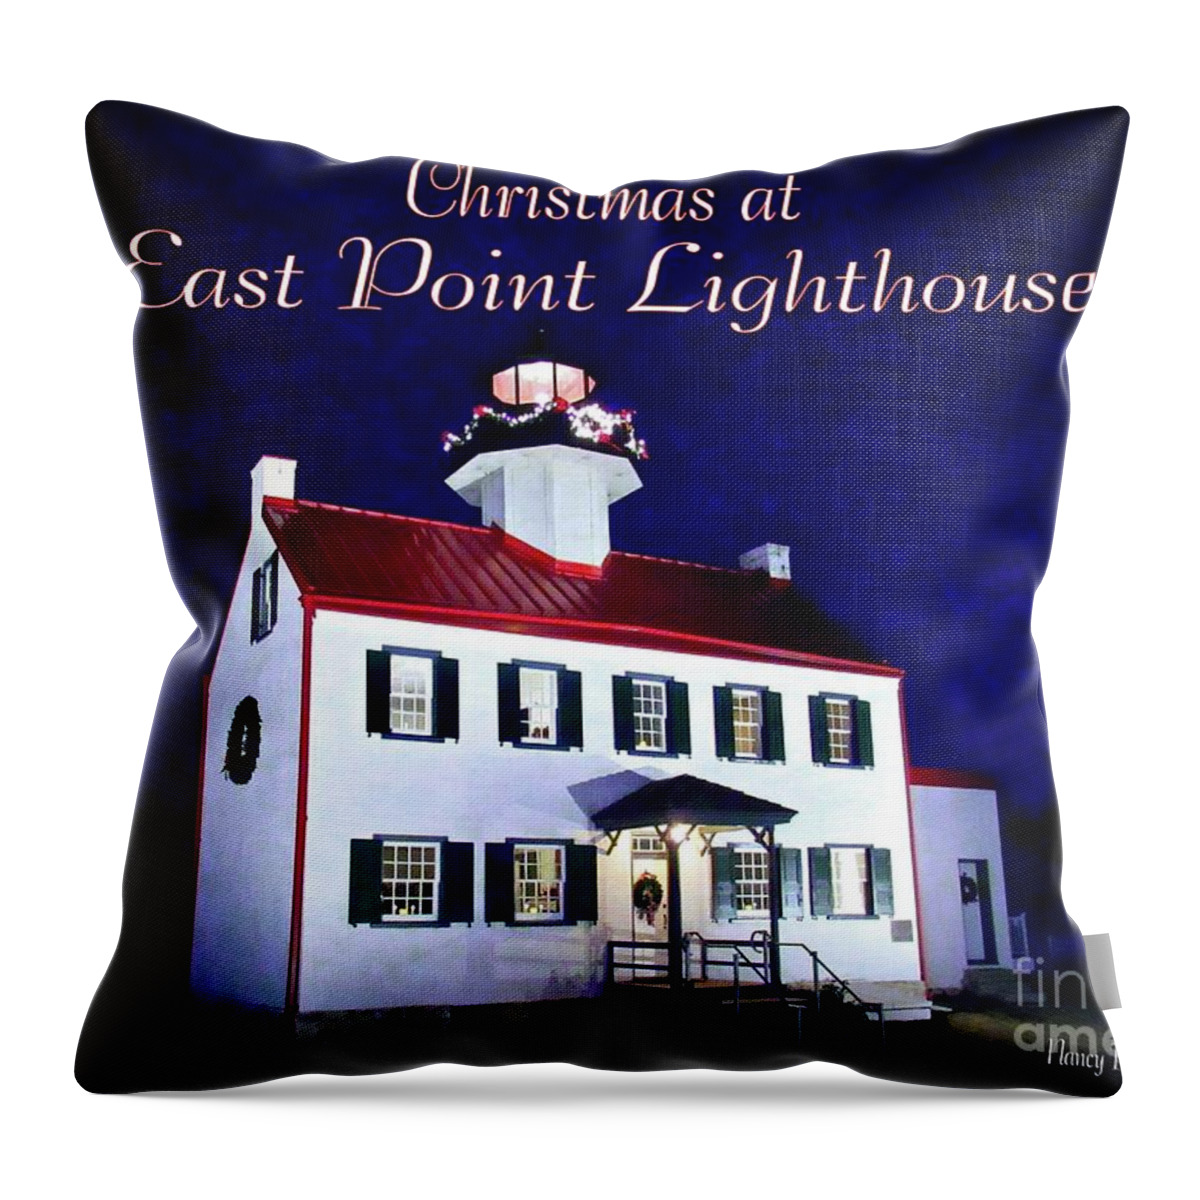 East Point Lighthouse Throw Pillow featuring the mixed media Christmas at East Point Lighthouse 2 by Nancy Patterson